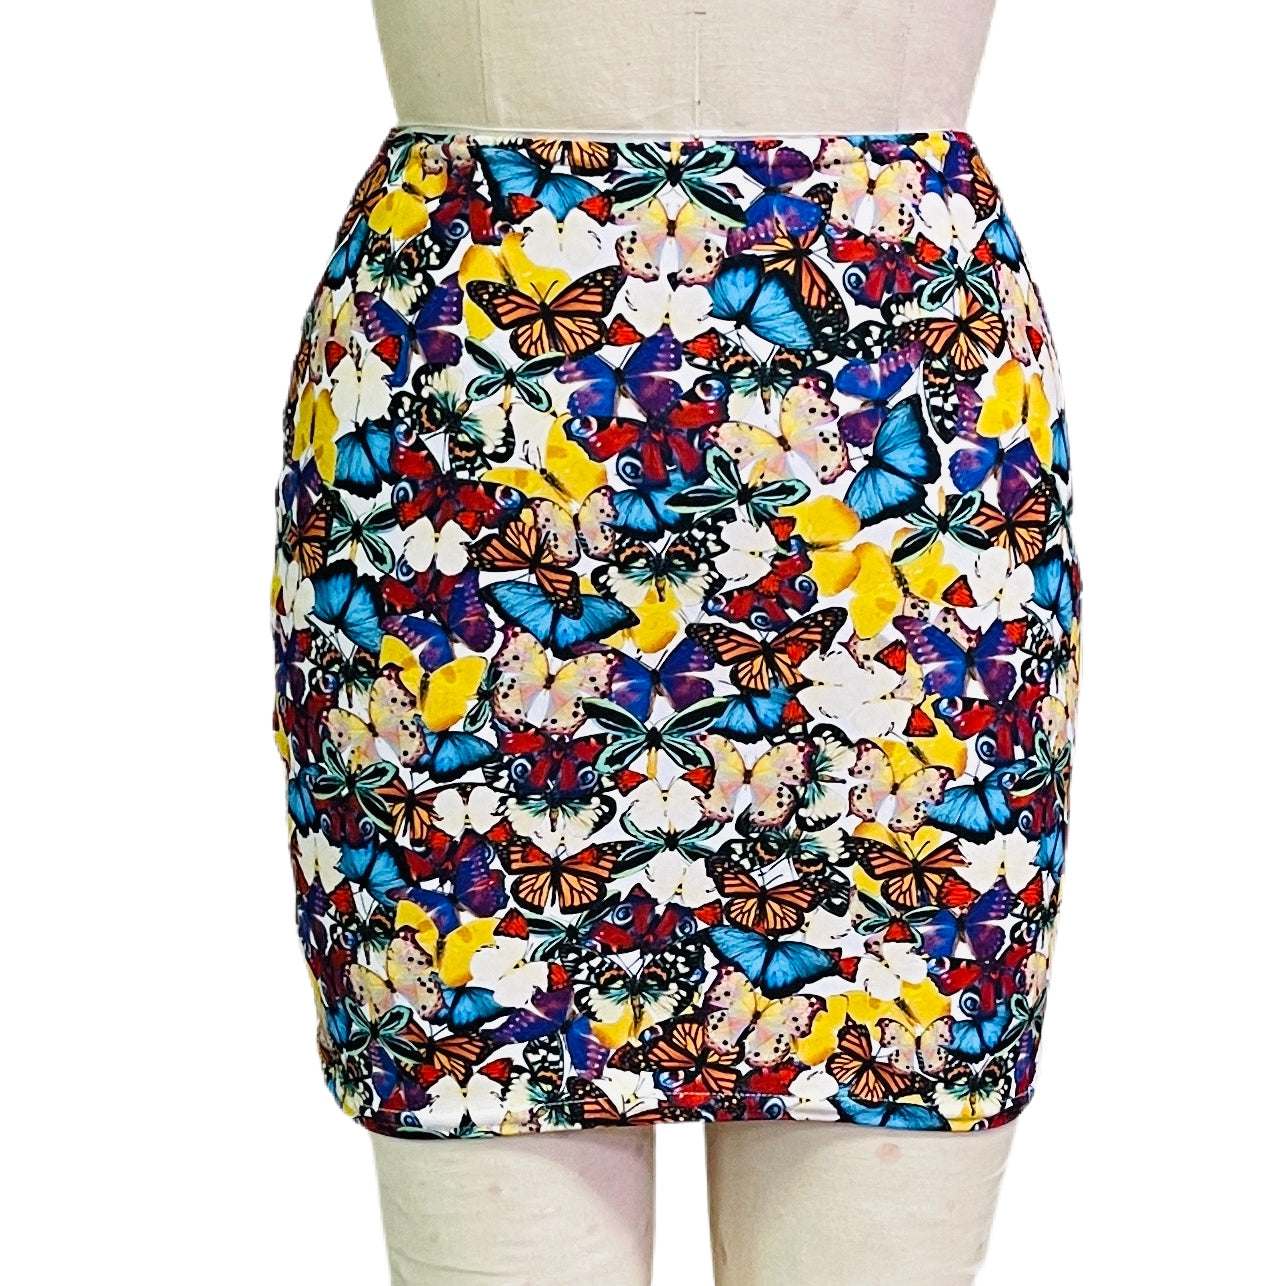 Adult Size Electric Avenue Printed Spandex Twirly Skirt with